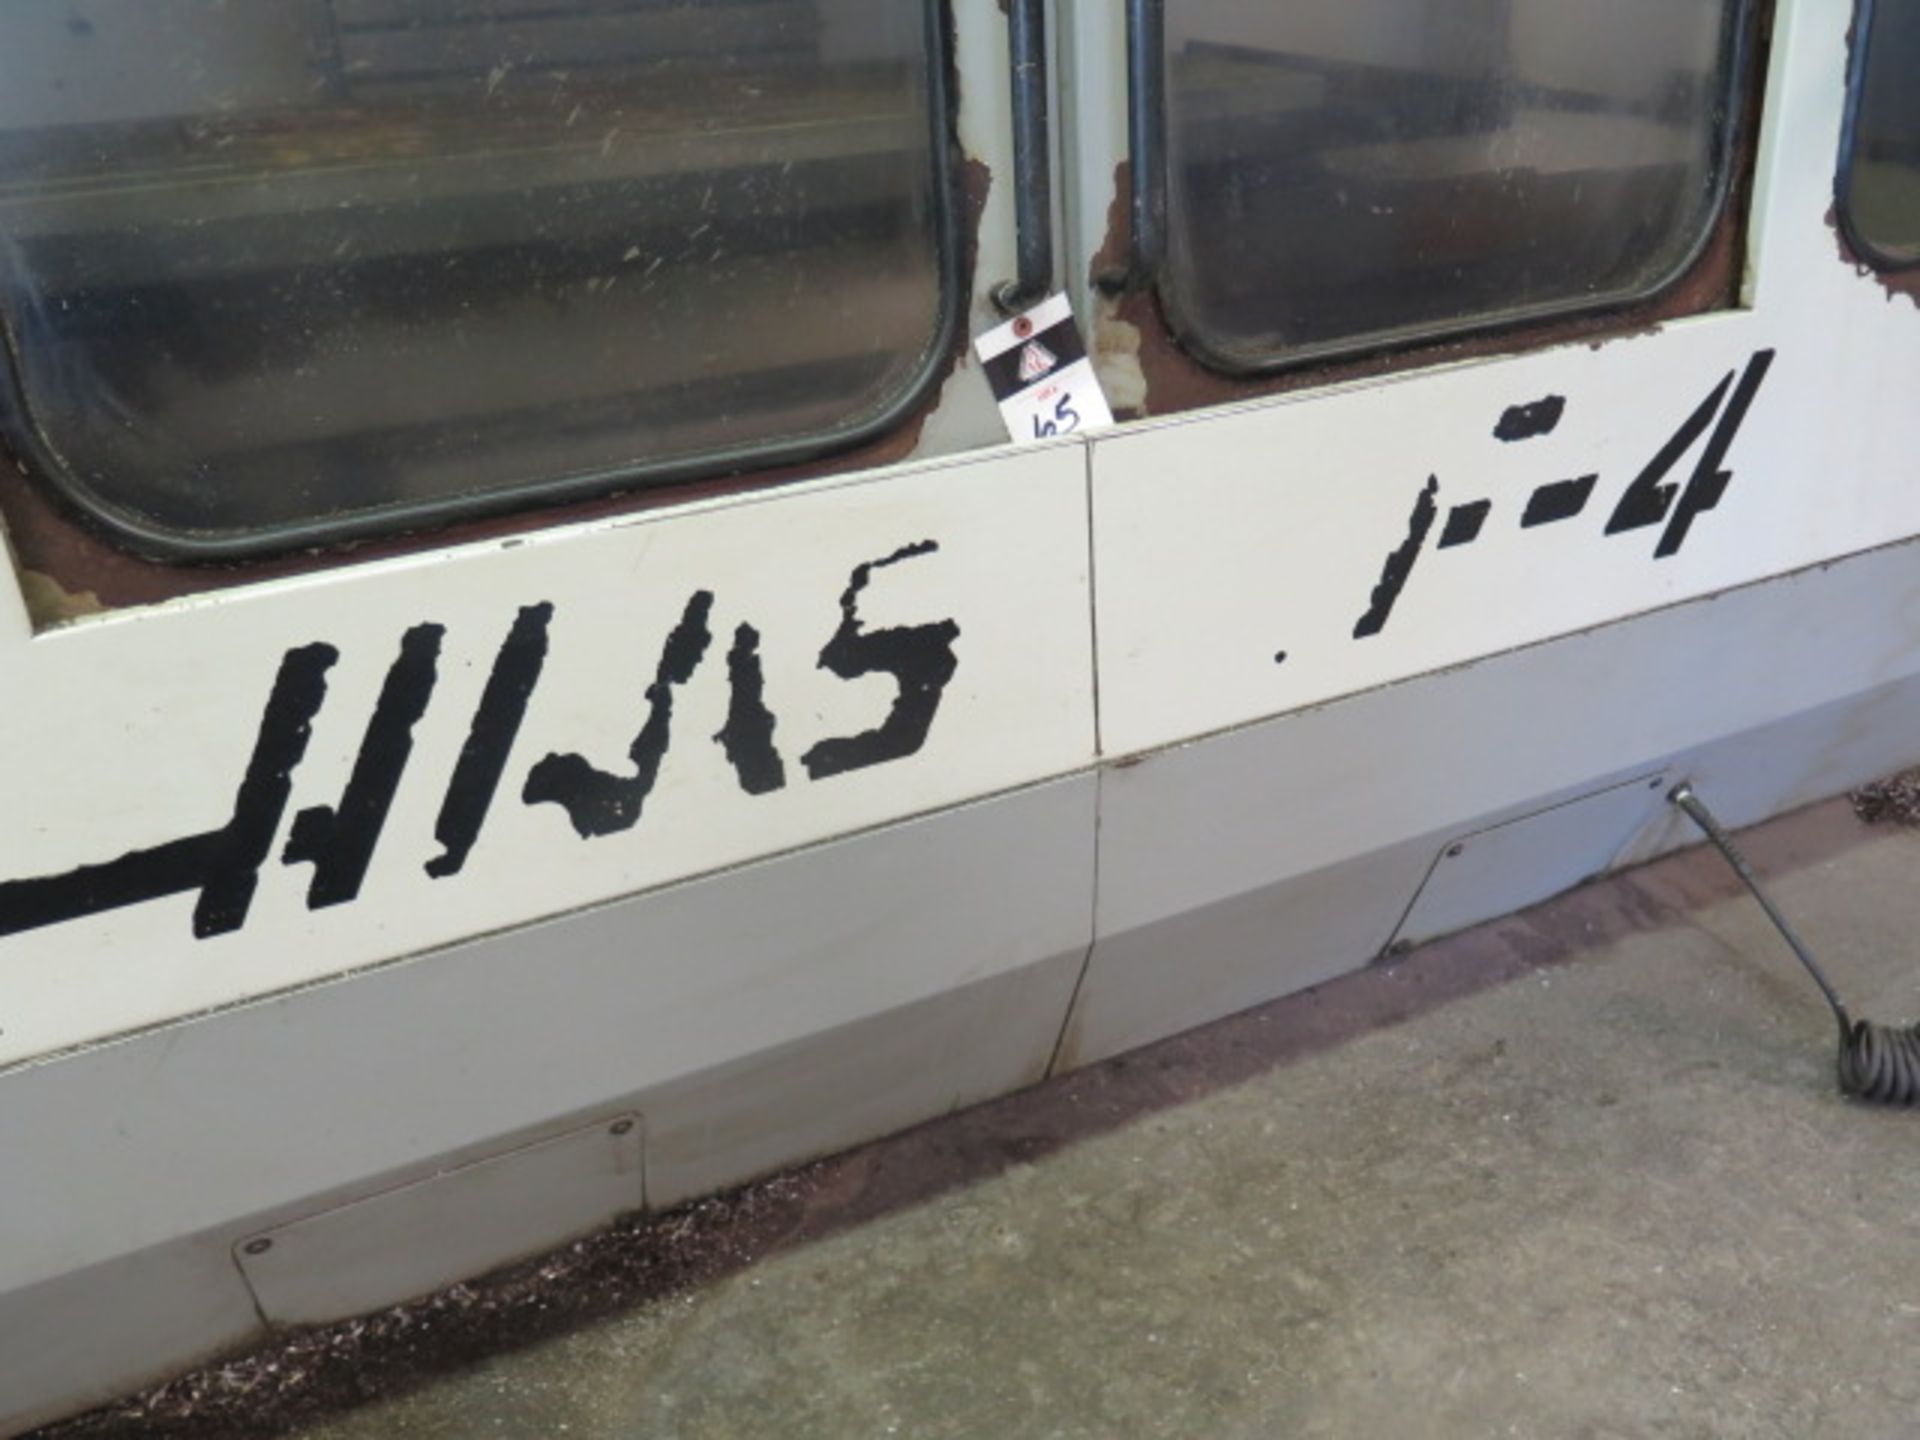 1994 Haas VF-4 CNC VMC s/n 3565 w/ Haas Controls, 20-Station ATC, CAT-40 Taper, SOLD AS IS - Image 4 of 15